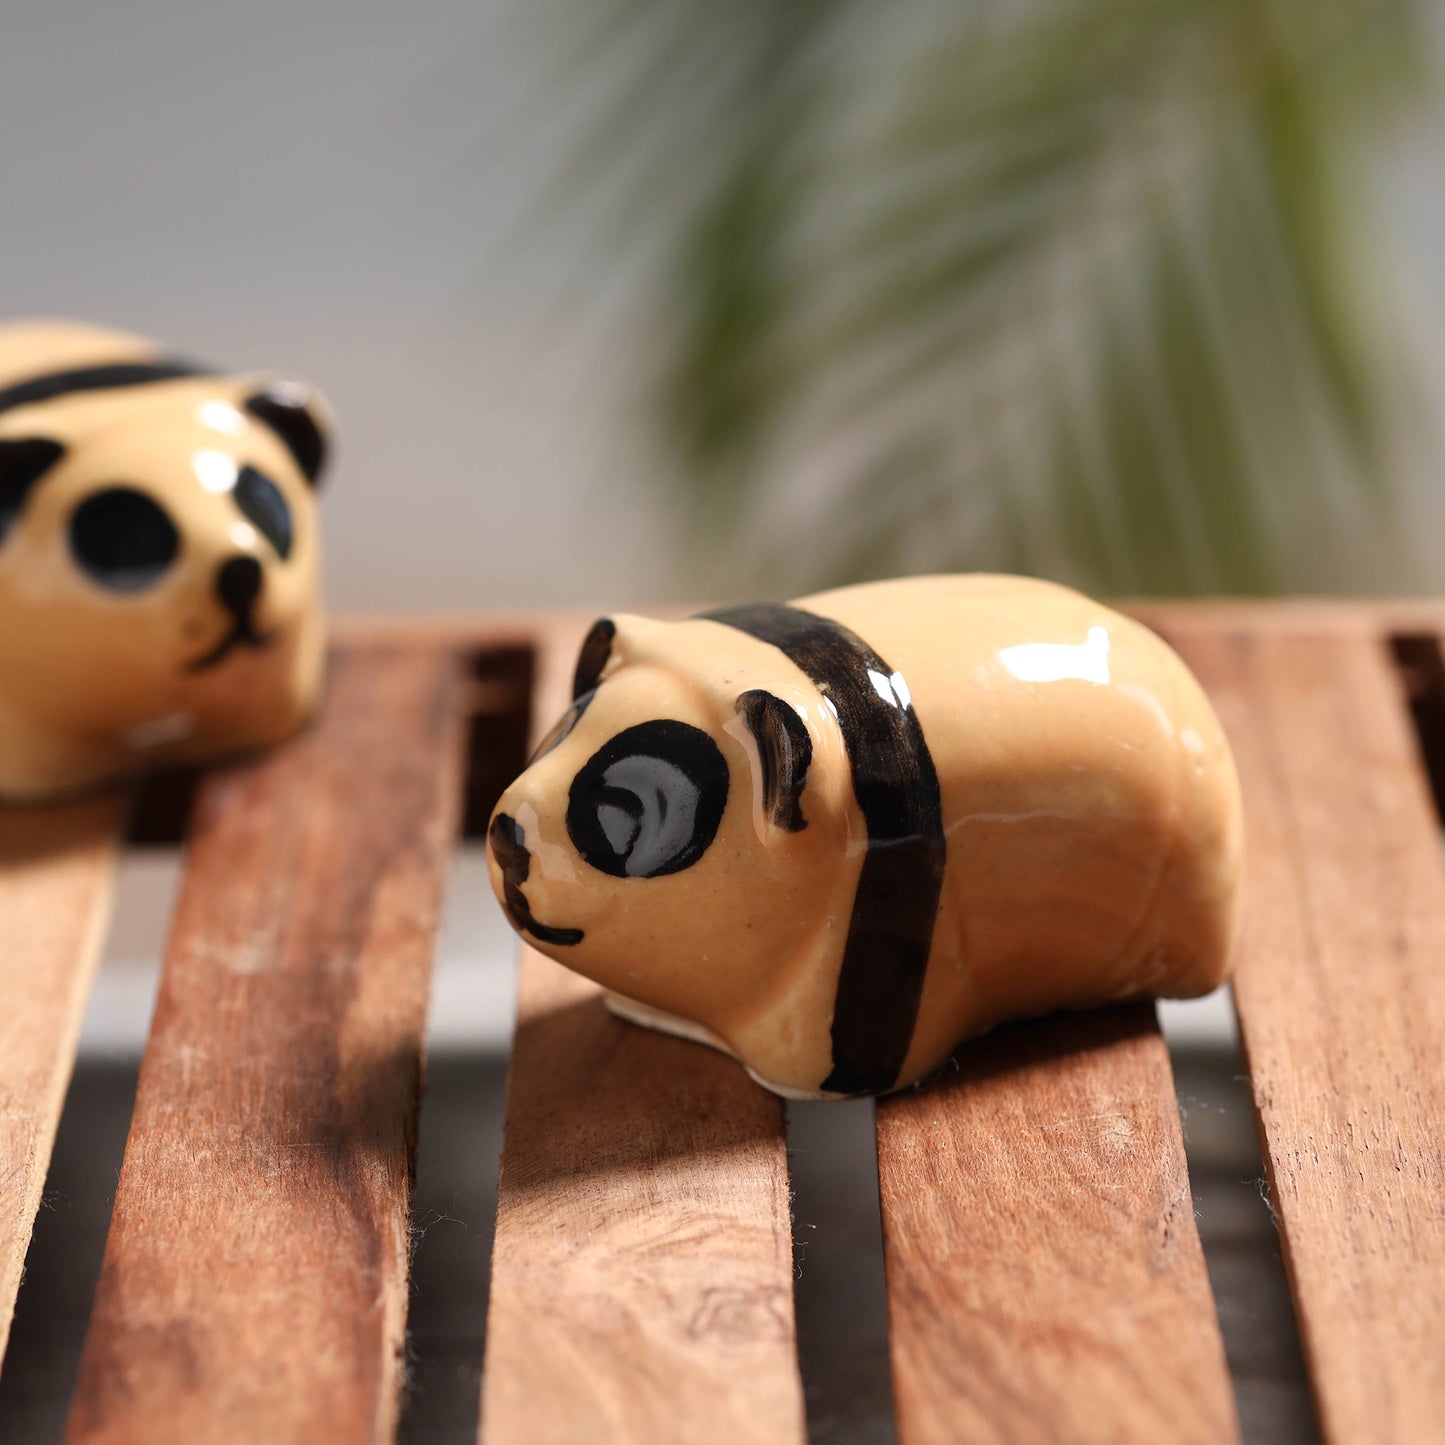 Raccoon - Handcrafted Ceramic Toys (Set of 2)